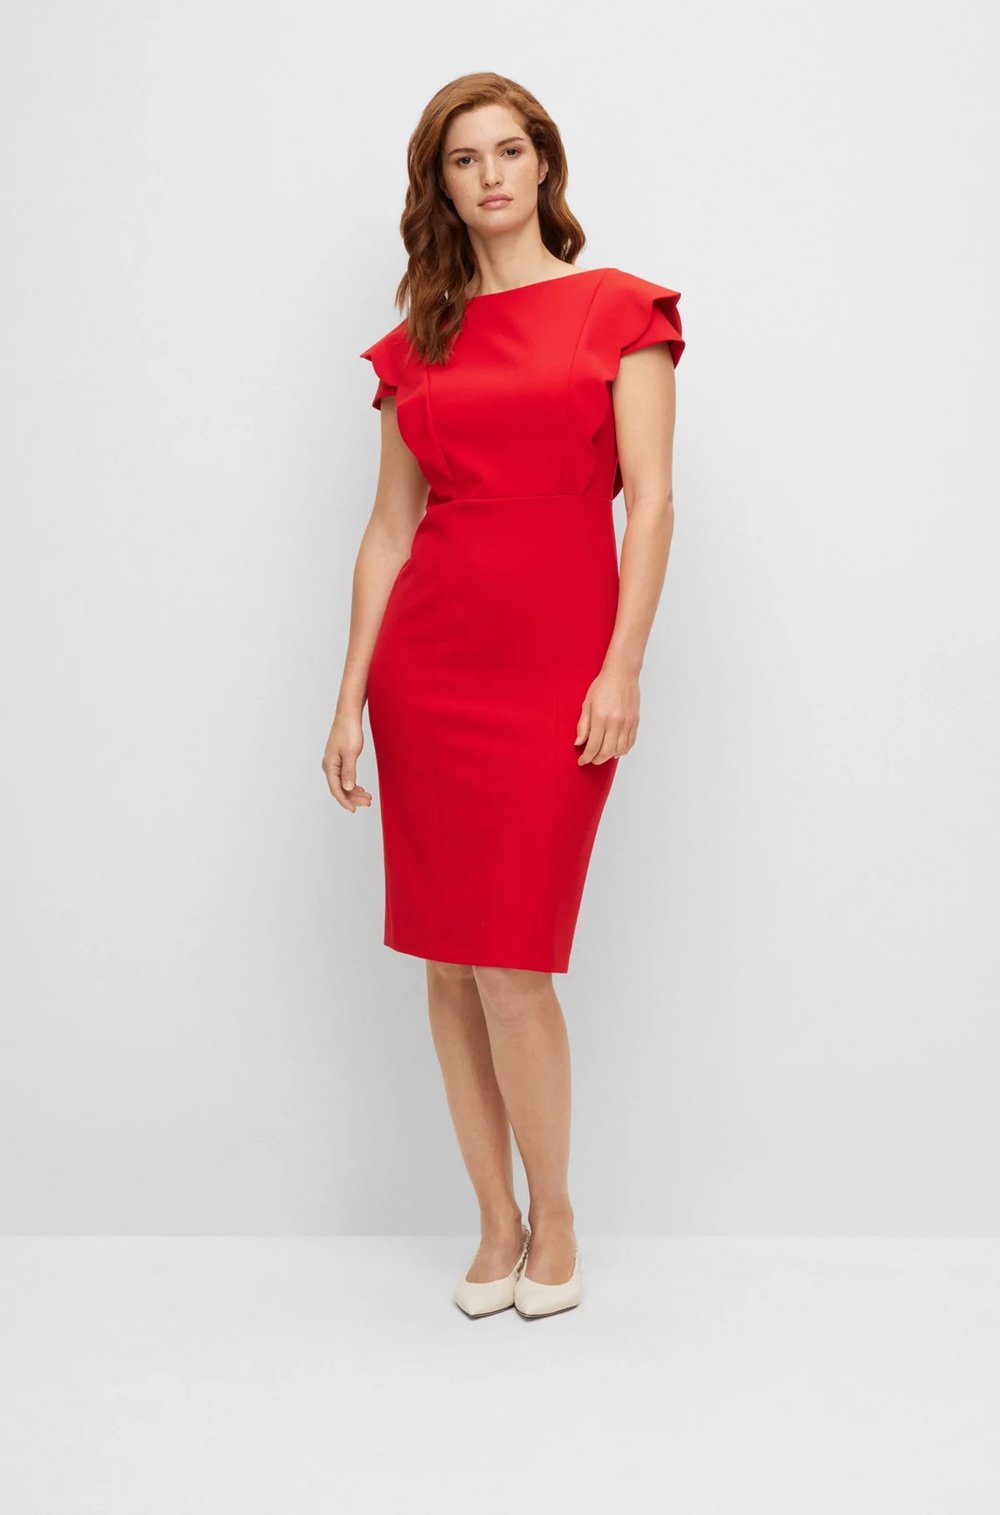 HUGO BOSS SLIM-FIT DRESS IN STRETCH COTTON WITH SCALLOPED SLEEVES in RED —  Fellini Tasmania | Fashion for man & woman